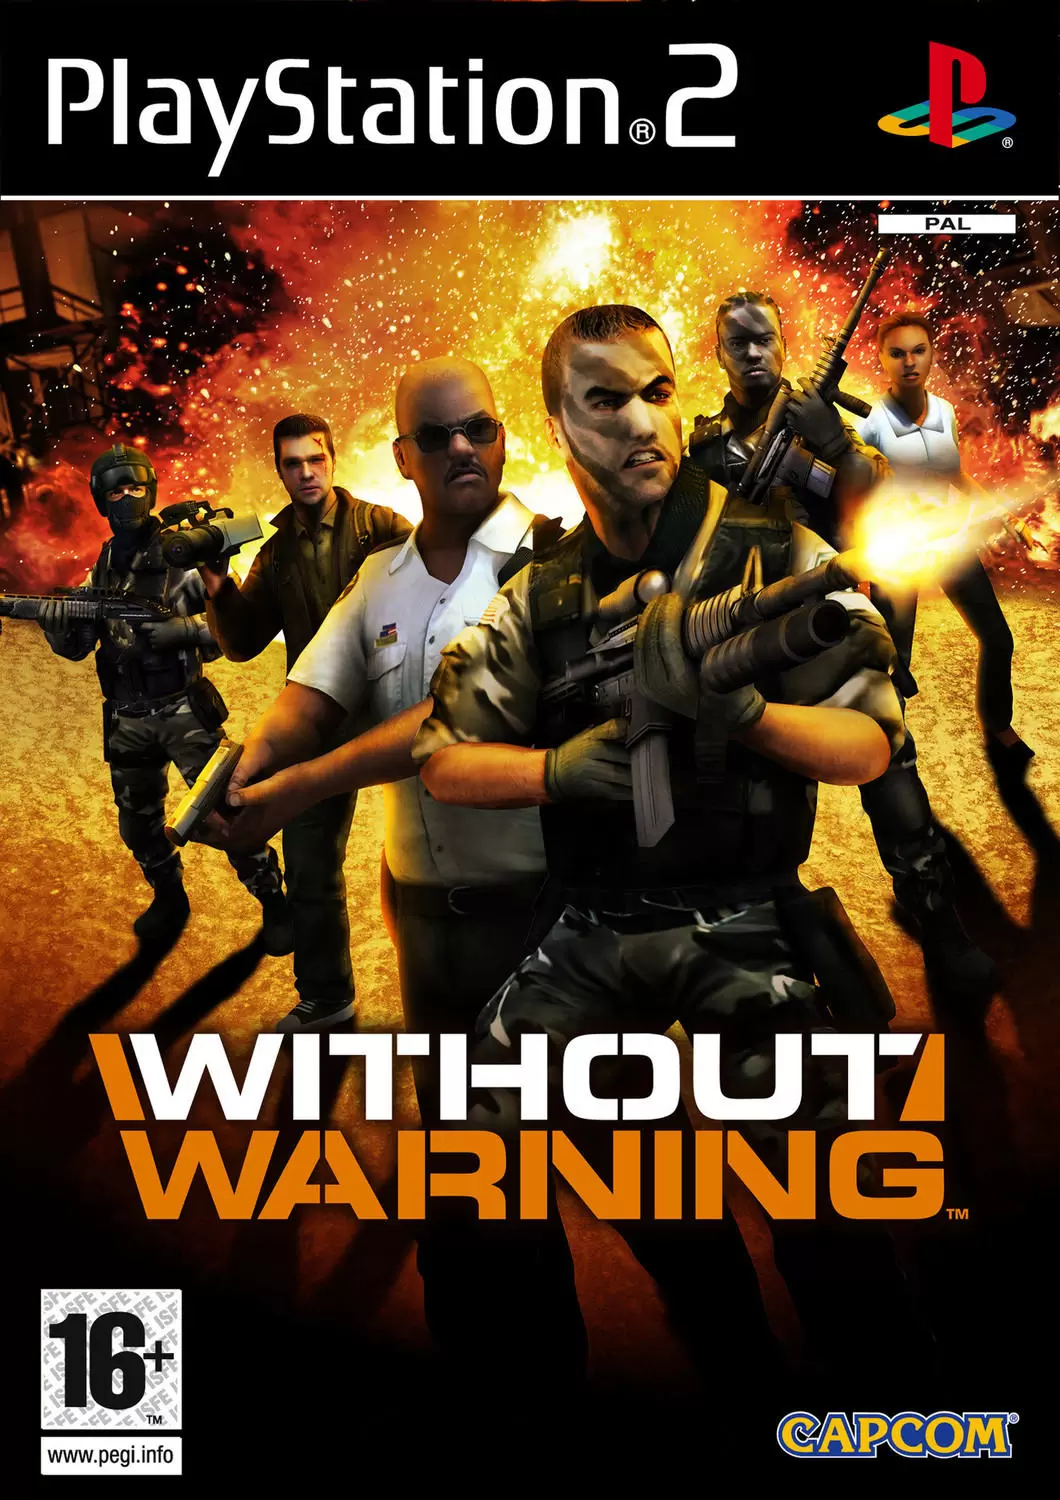 PS2 Games - Without Warning